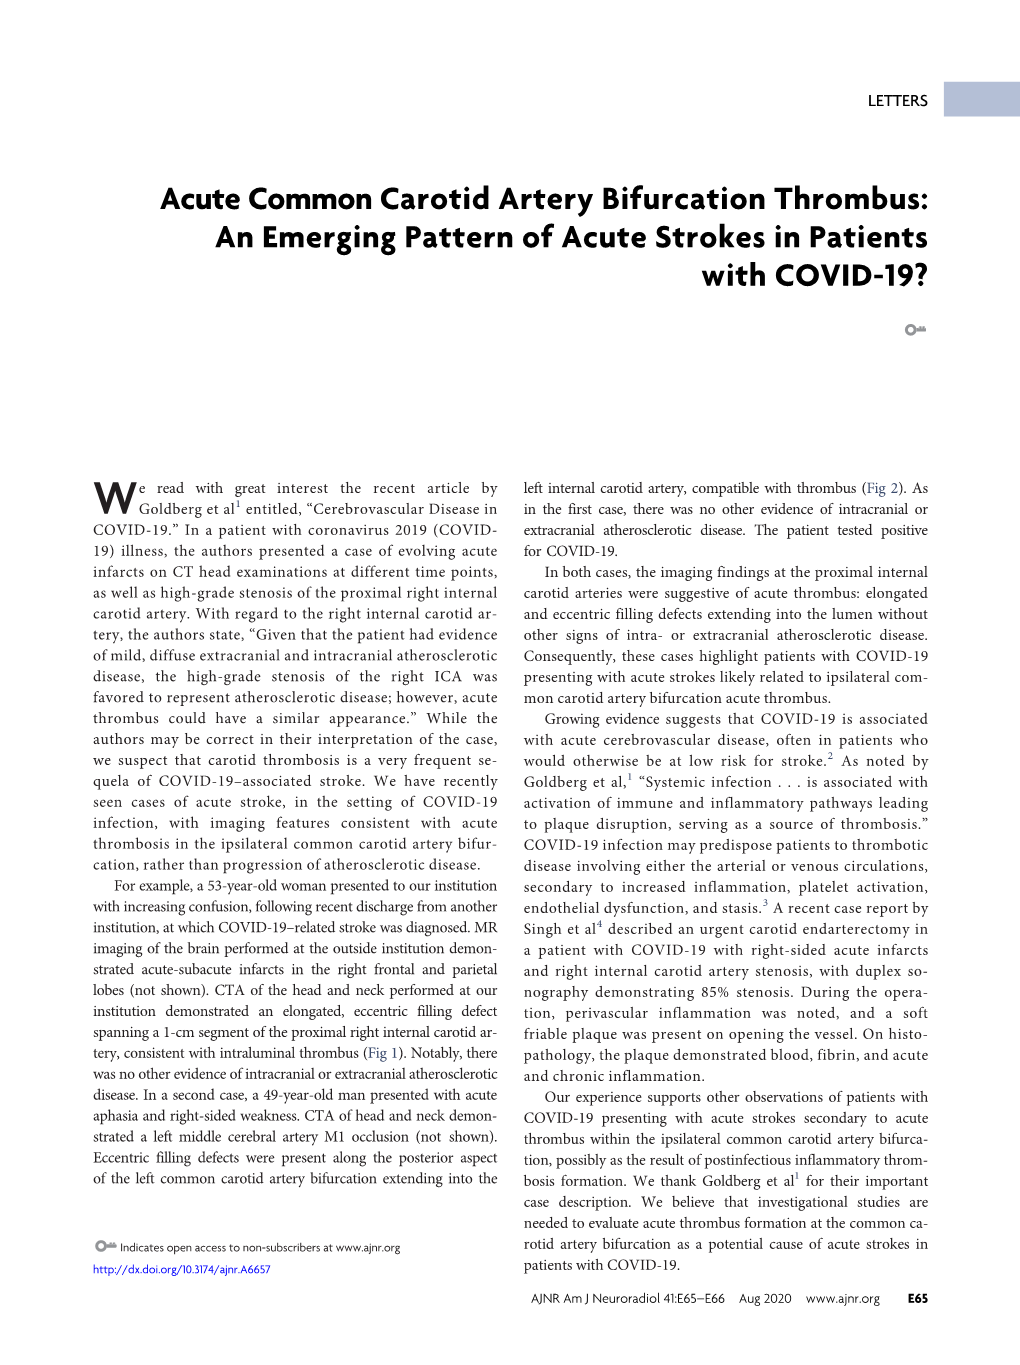 Acute Common Carotid Artery Bifurcation Thrombus: an Emerging Pattern of Acute Strokes in Patients with COVID-19?